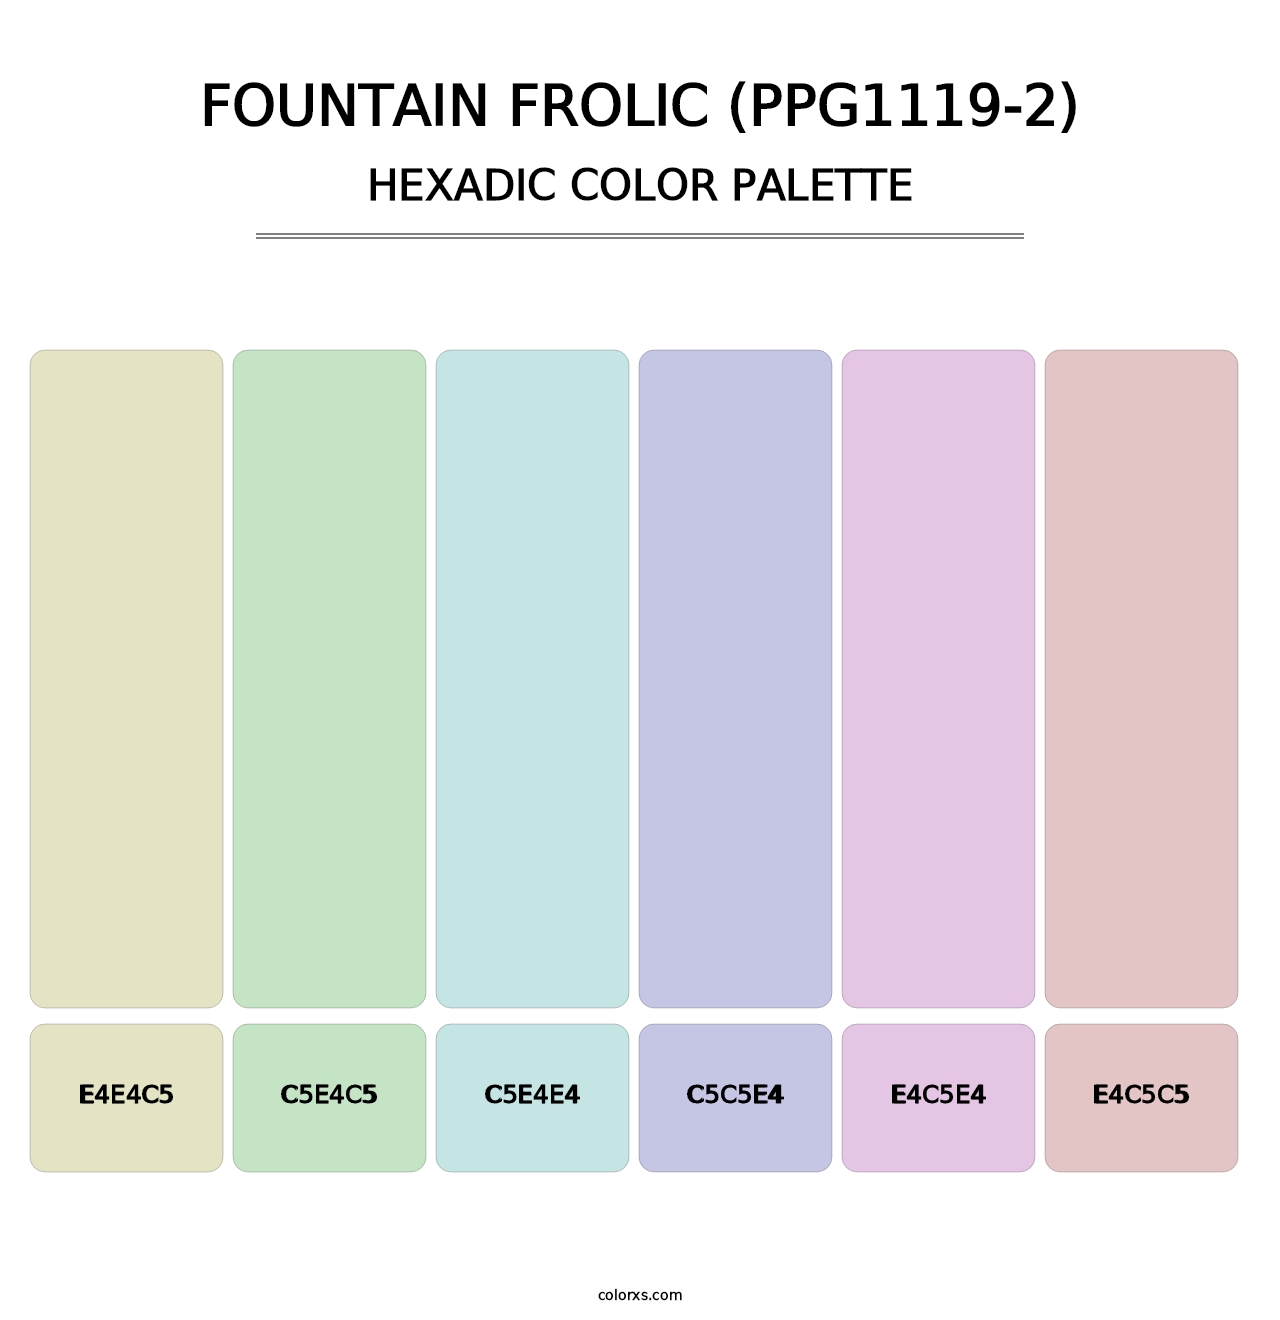 Fountain Frolic (PPG1119-2) - Hexadic Color Palette